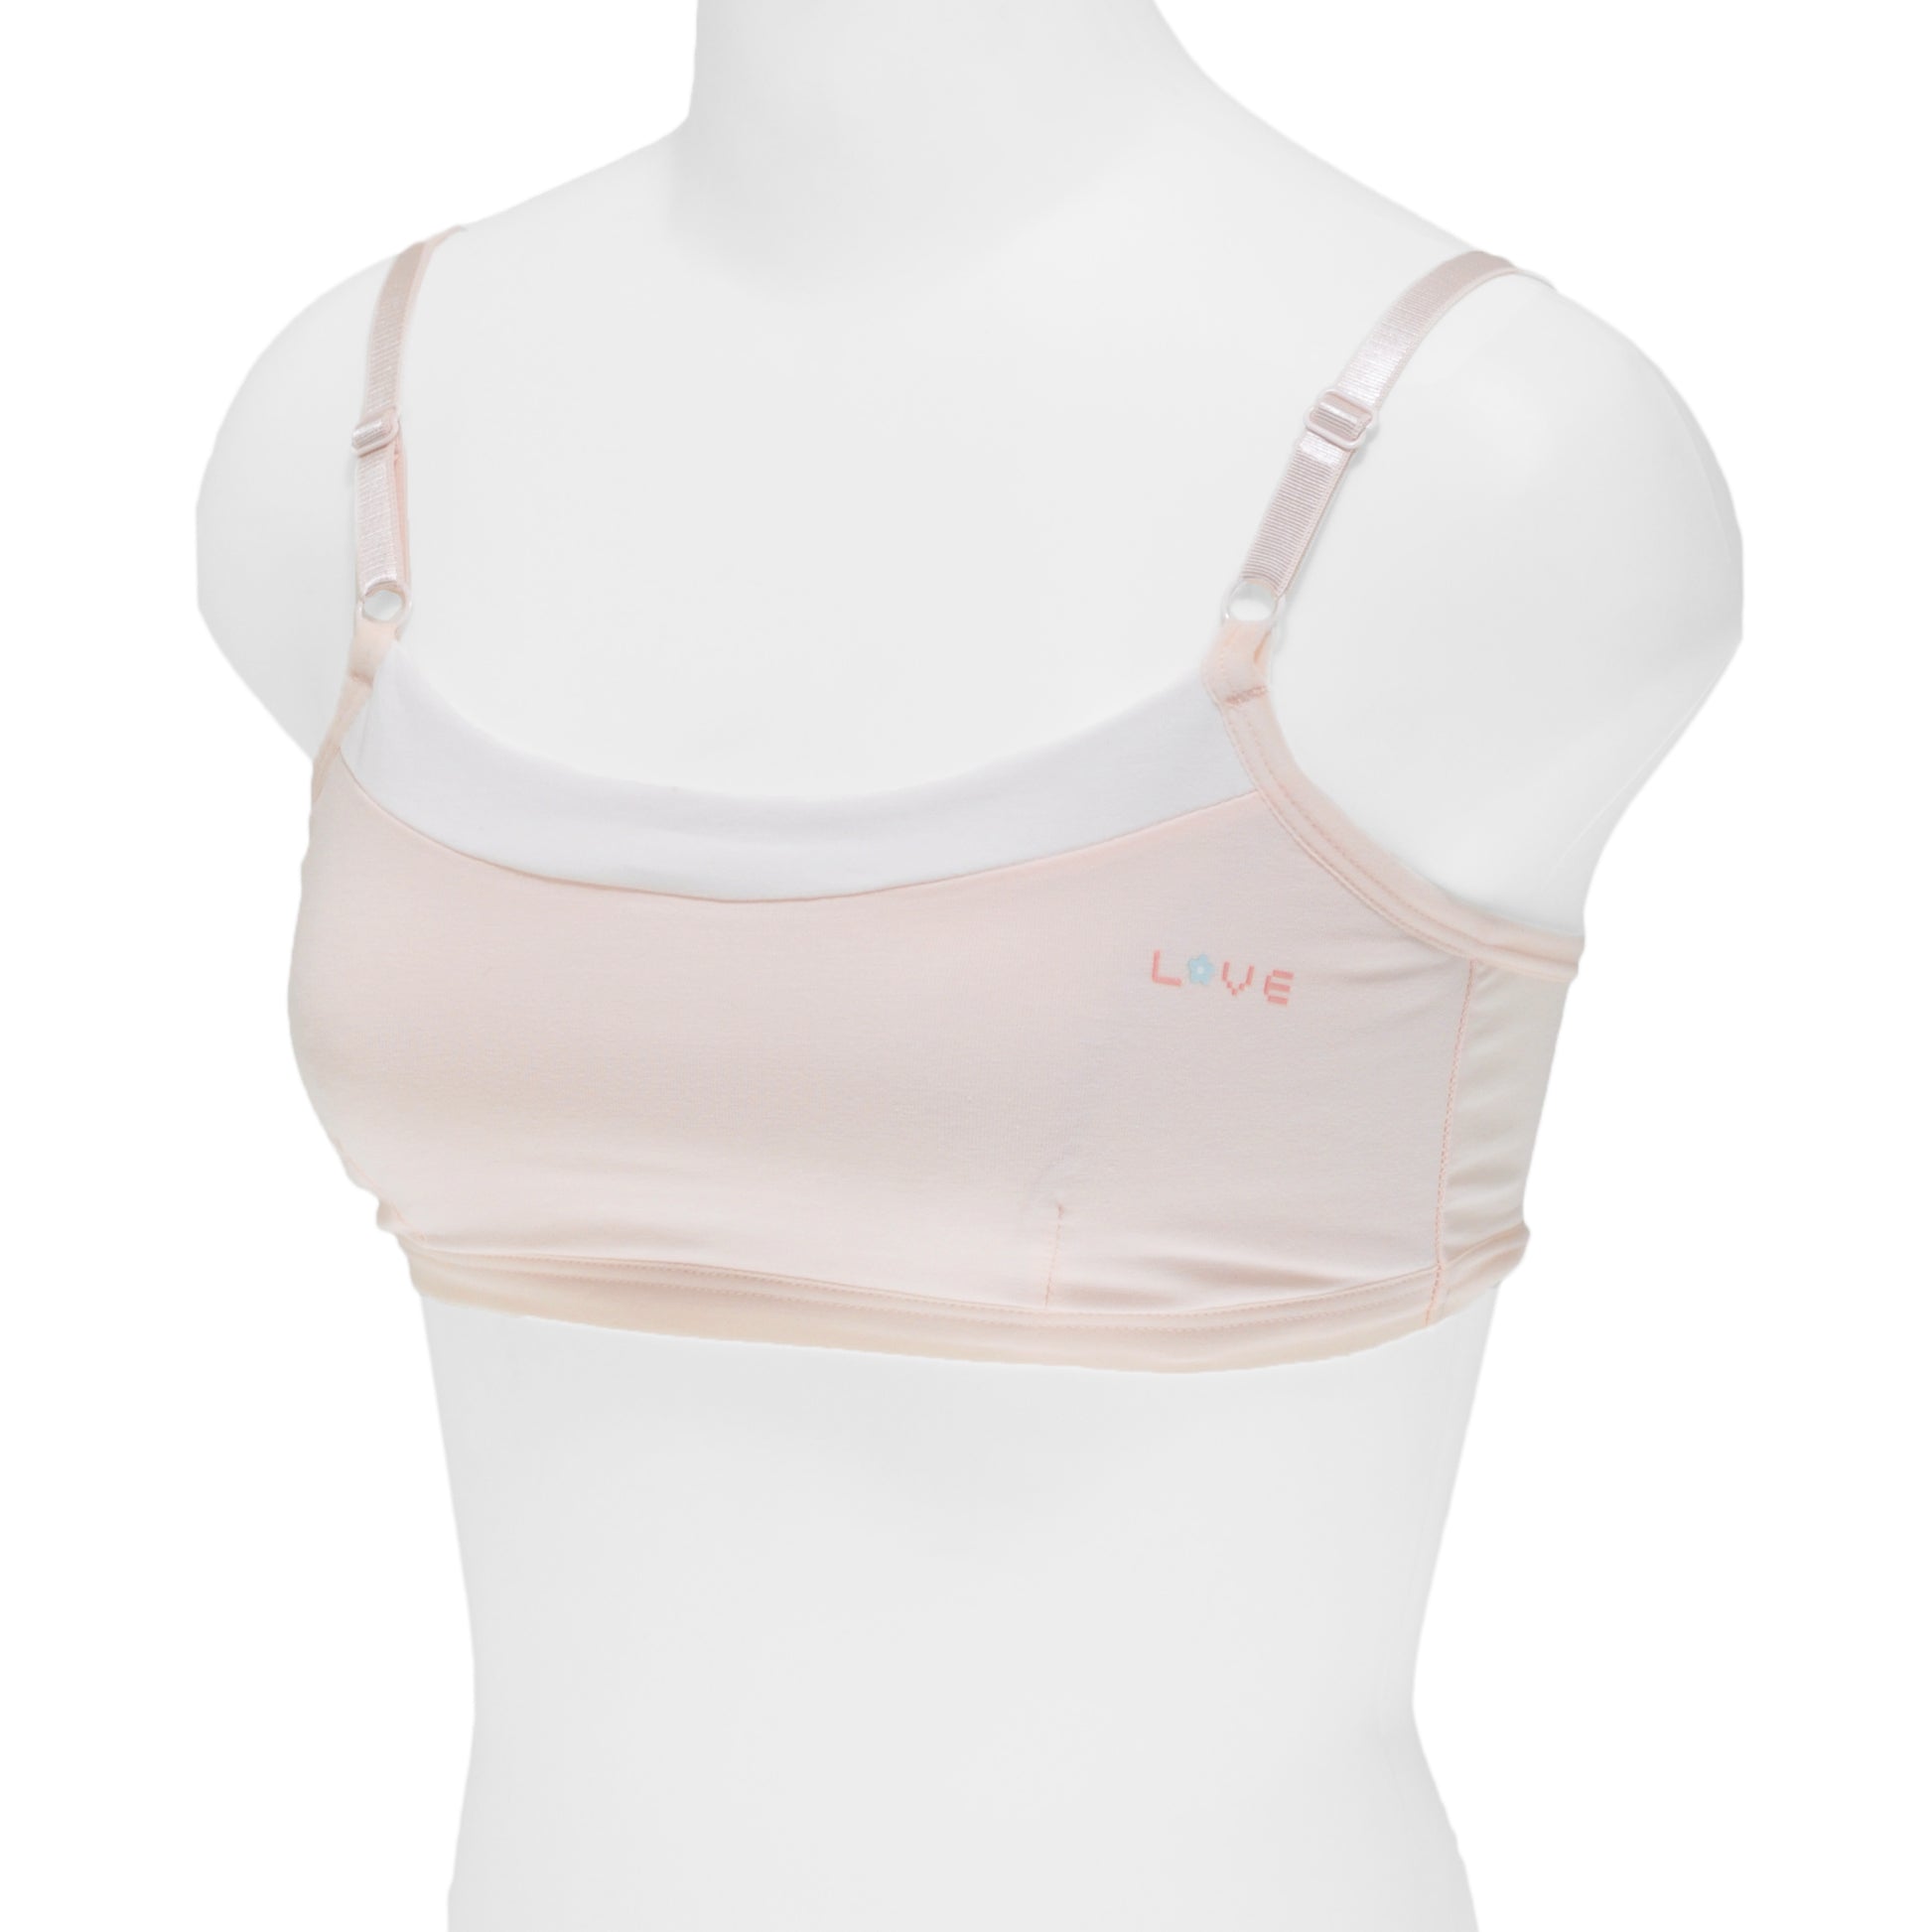 Angelina Girl's Wire-free Cotton Training Bra with Love Detail –